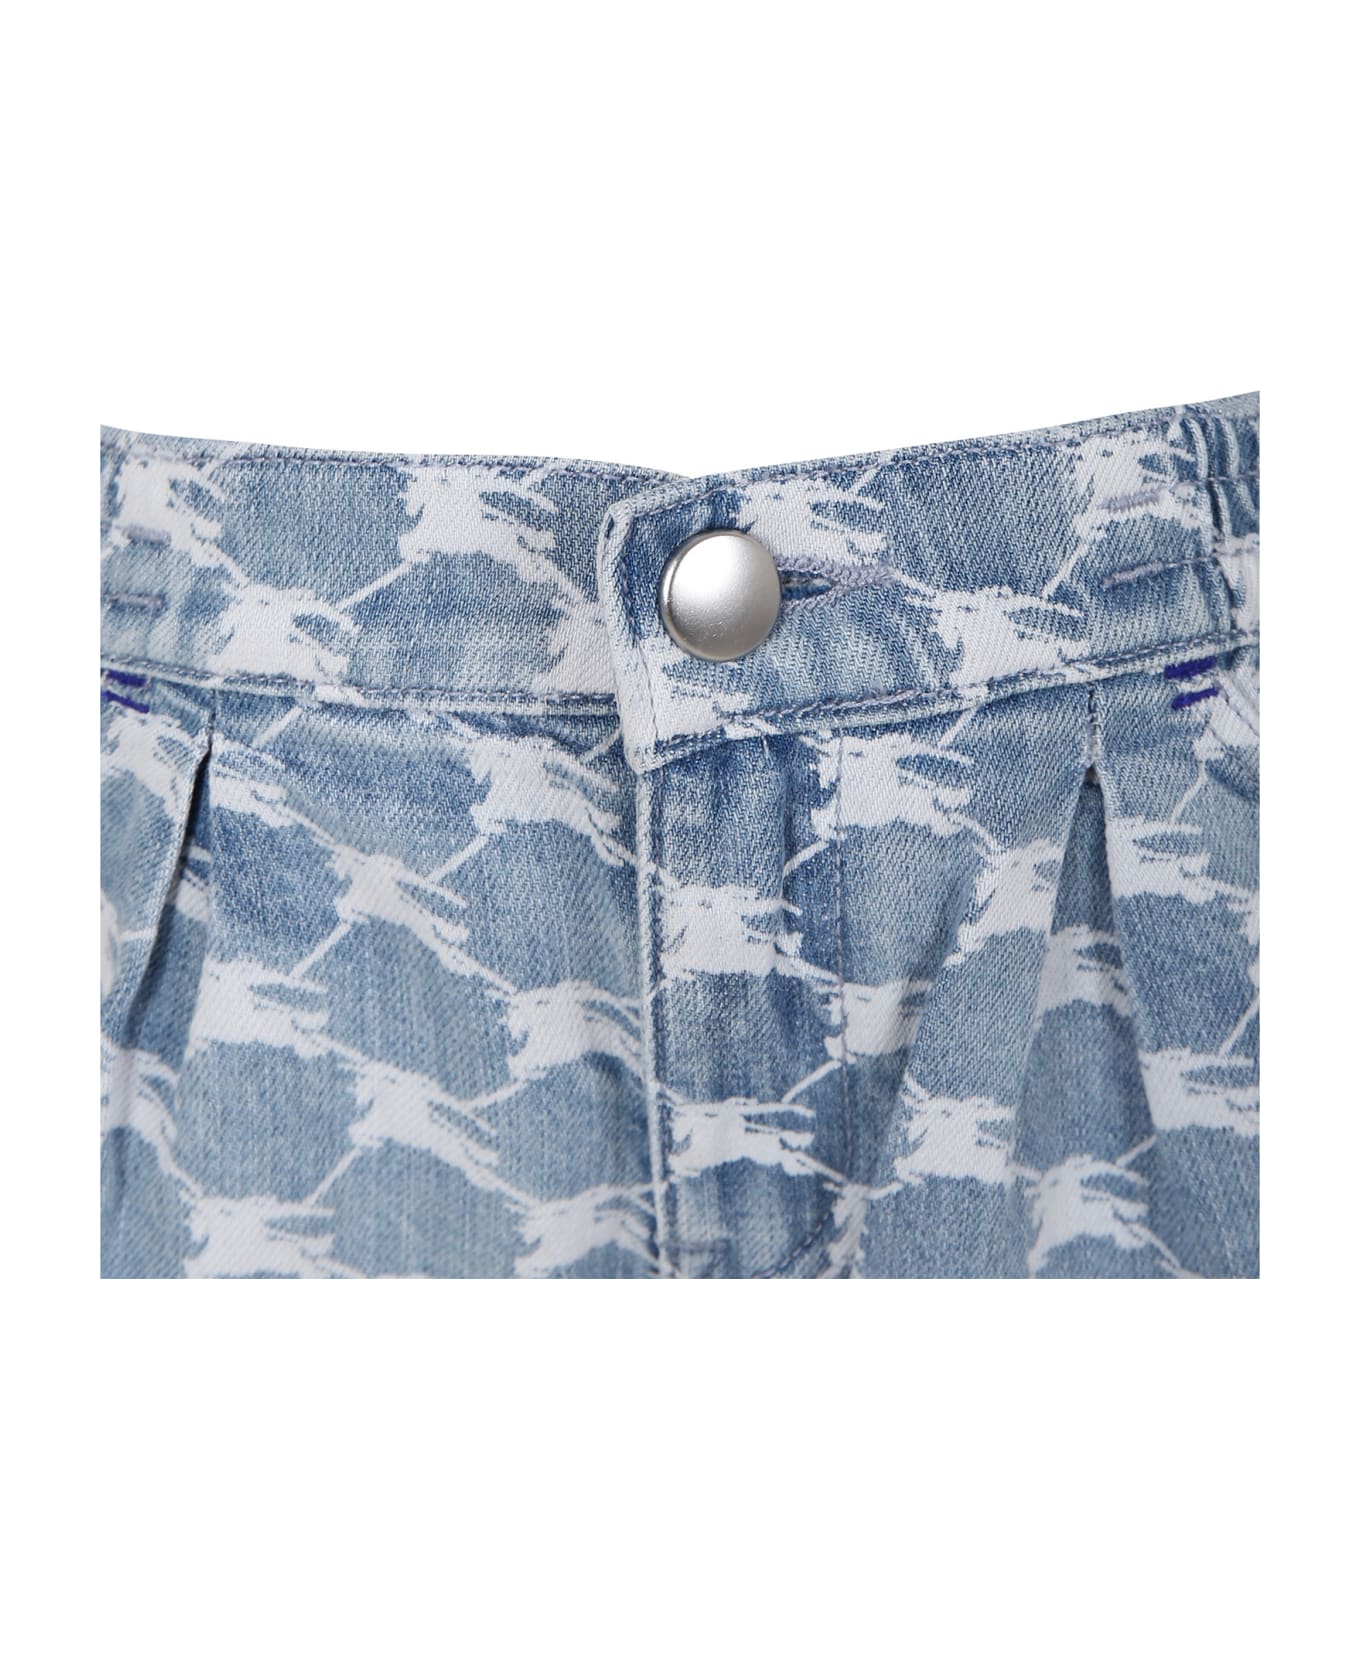 Burberry Denim Shorts For Girl With Iconic All-over Logo. - Denim